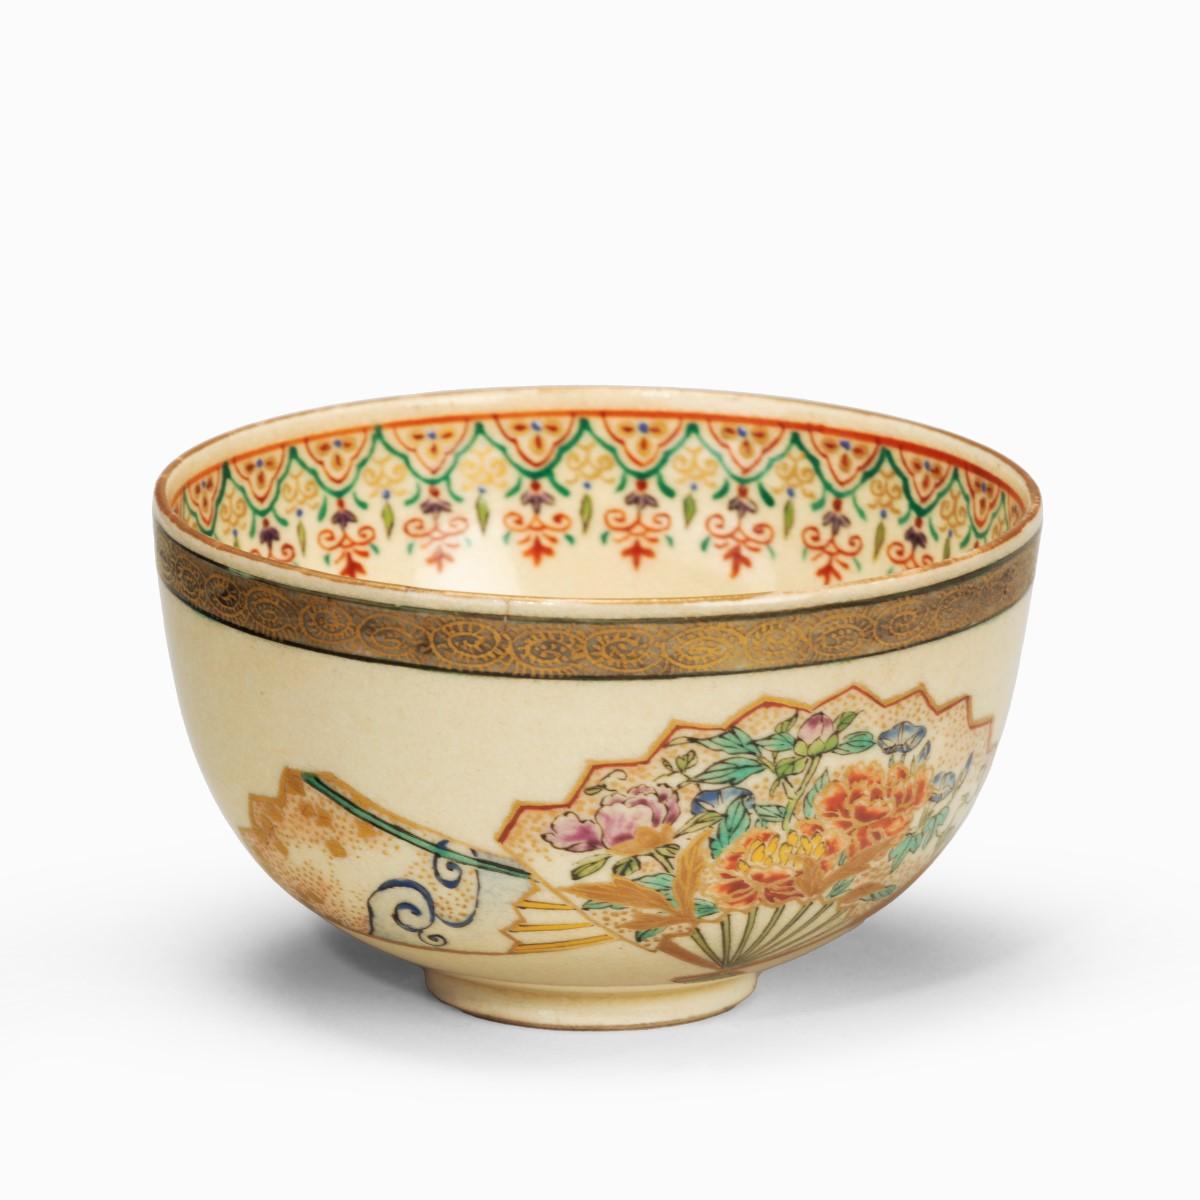 A small Satsuma earthenware bowl, painted in overglaze enamels and gilt with three fans. Japanese, circa 1900.

Measures: Height 2 inches Diameter 3 ½ inches.